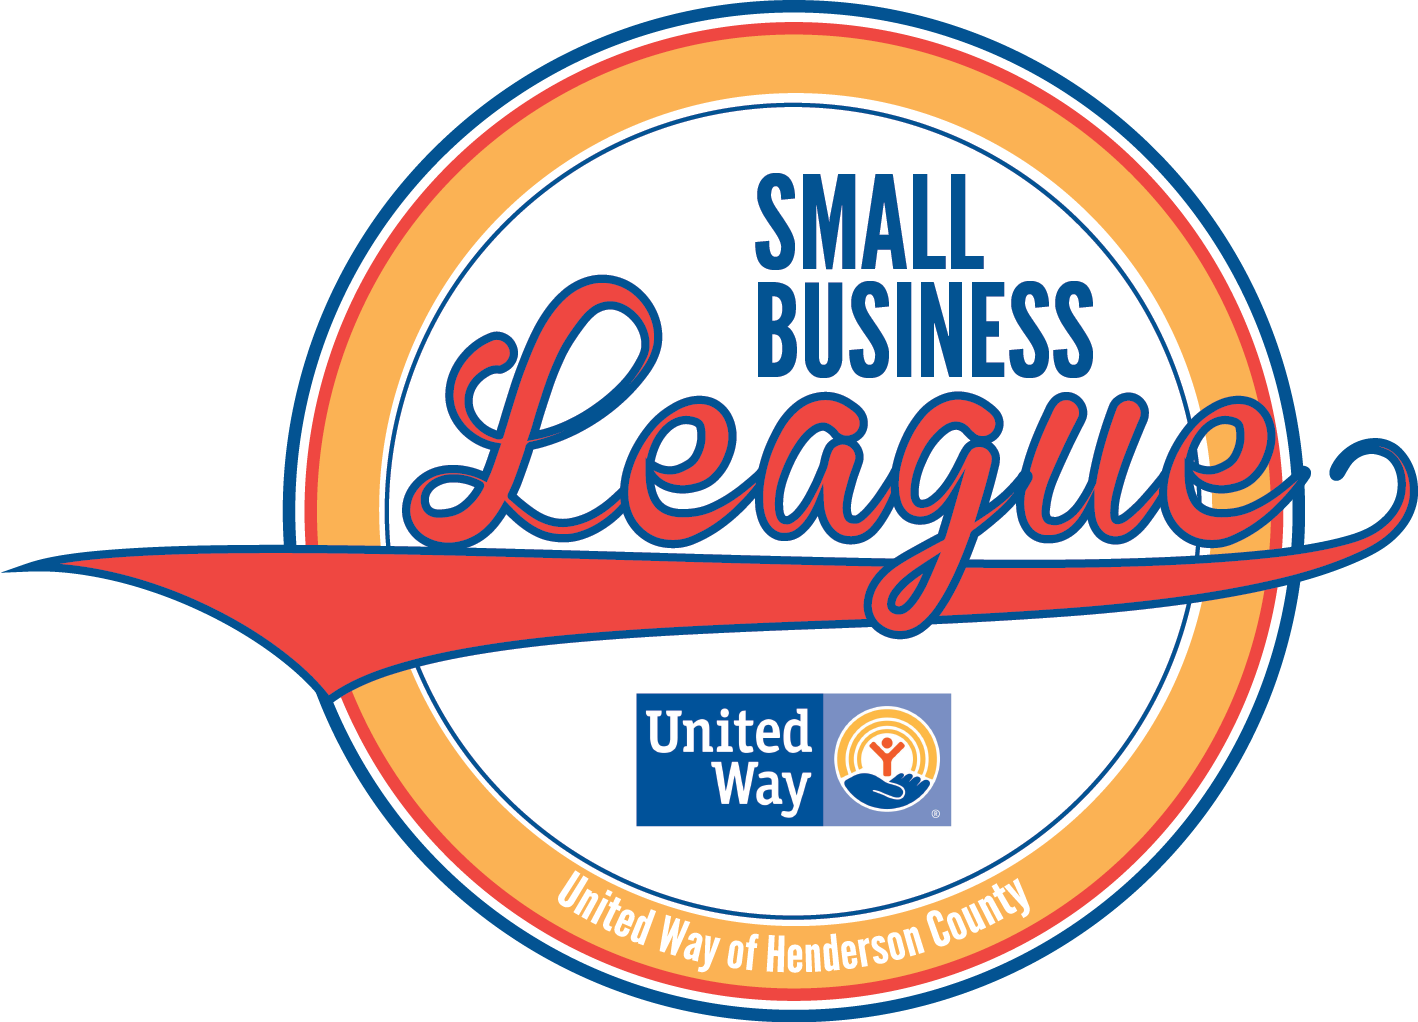 Small Business league